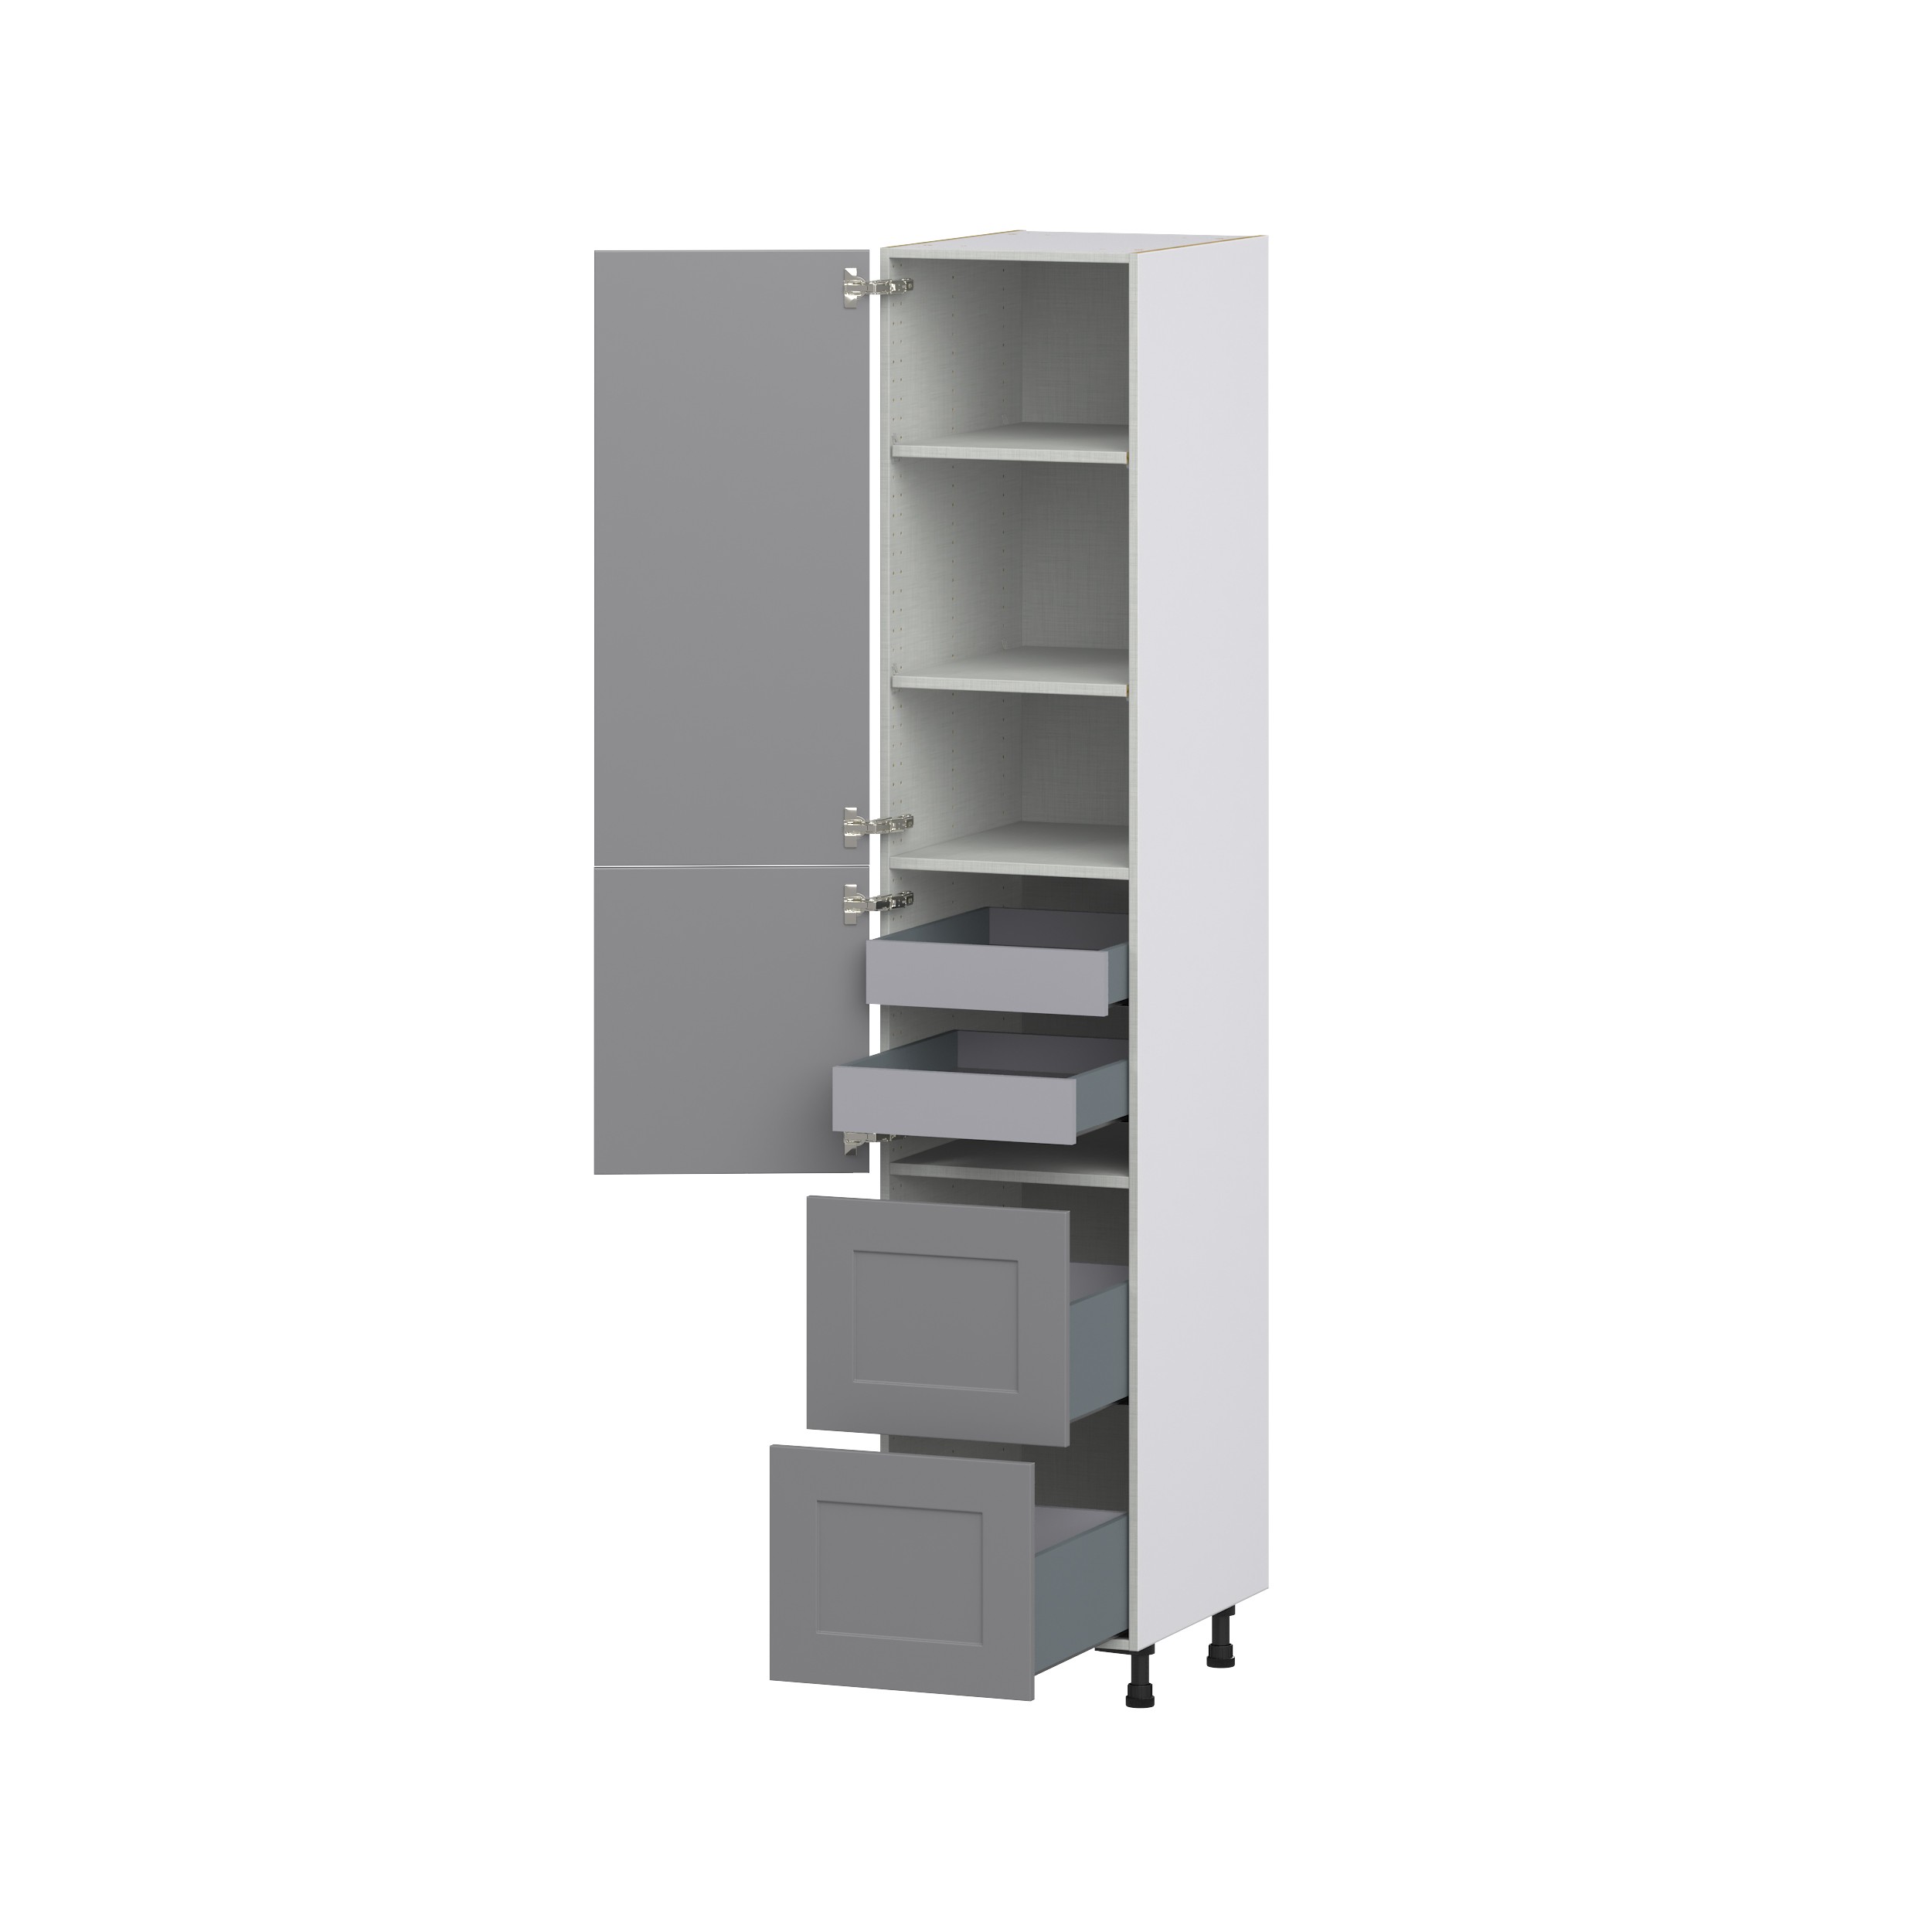 Willow Painted Slate Gray Shaker Assembled Pantry Cabinet 1 Doors with 2 Drawers and 2 Inner Drawers (18 in. W X 94.5 in. H X 24 in. D)